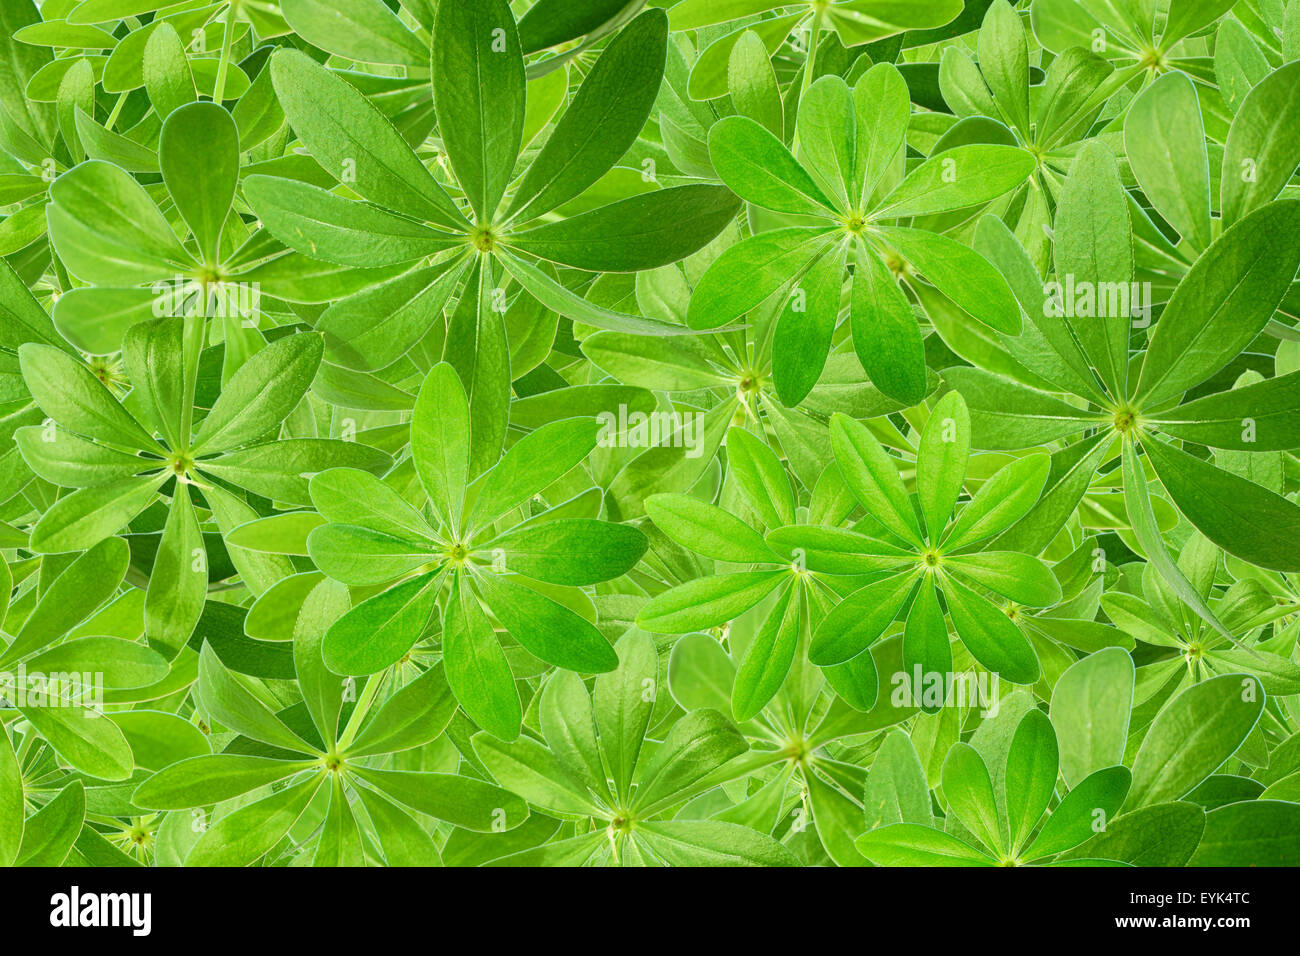 Many green woodruff leaves as a background Stock Photo